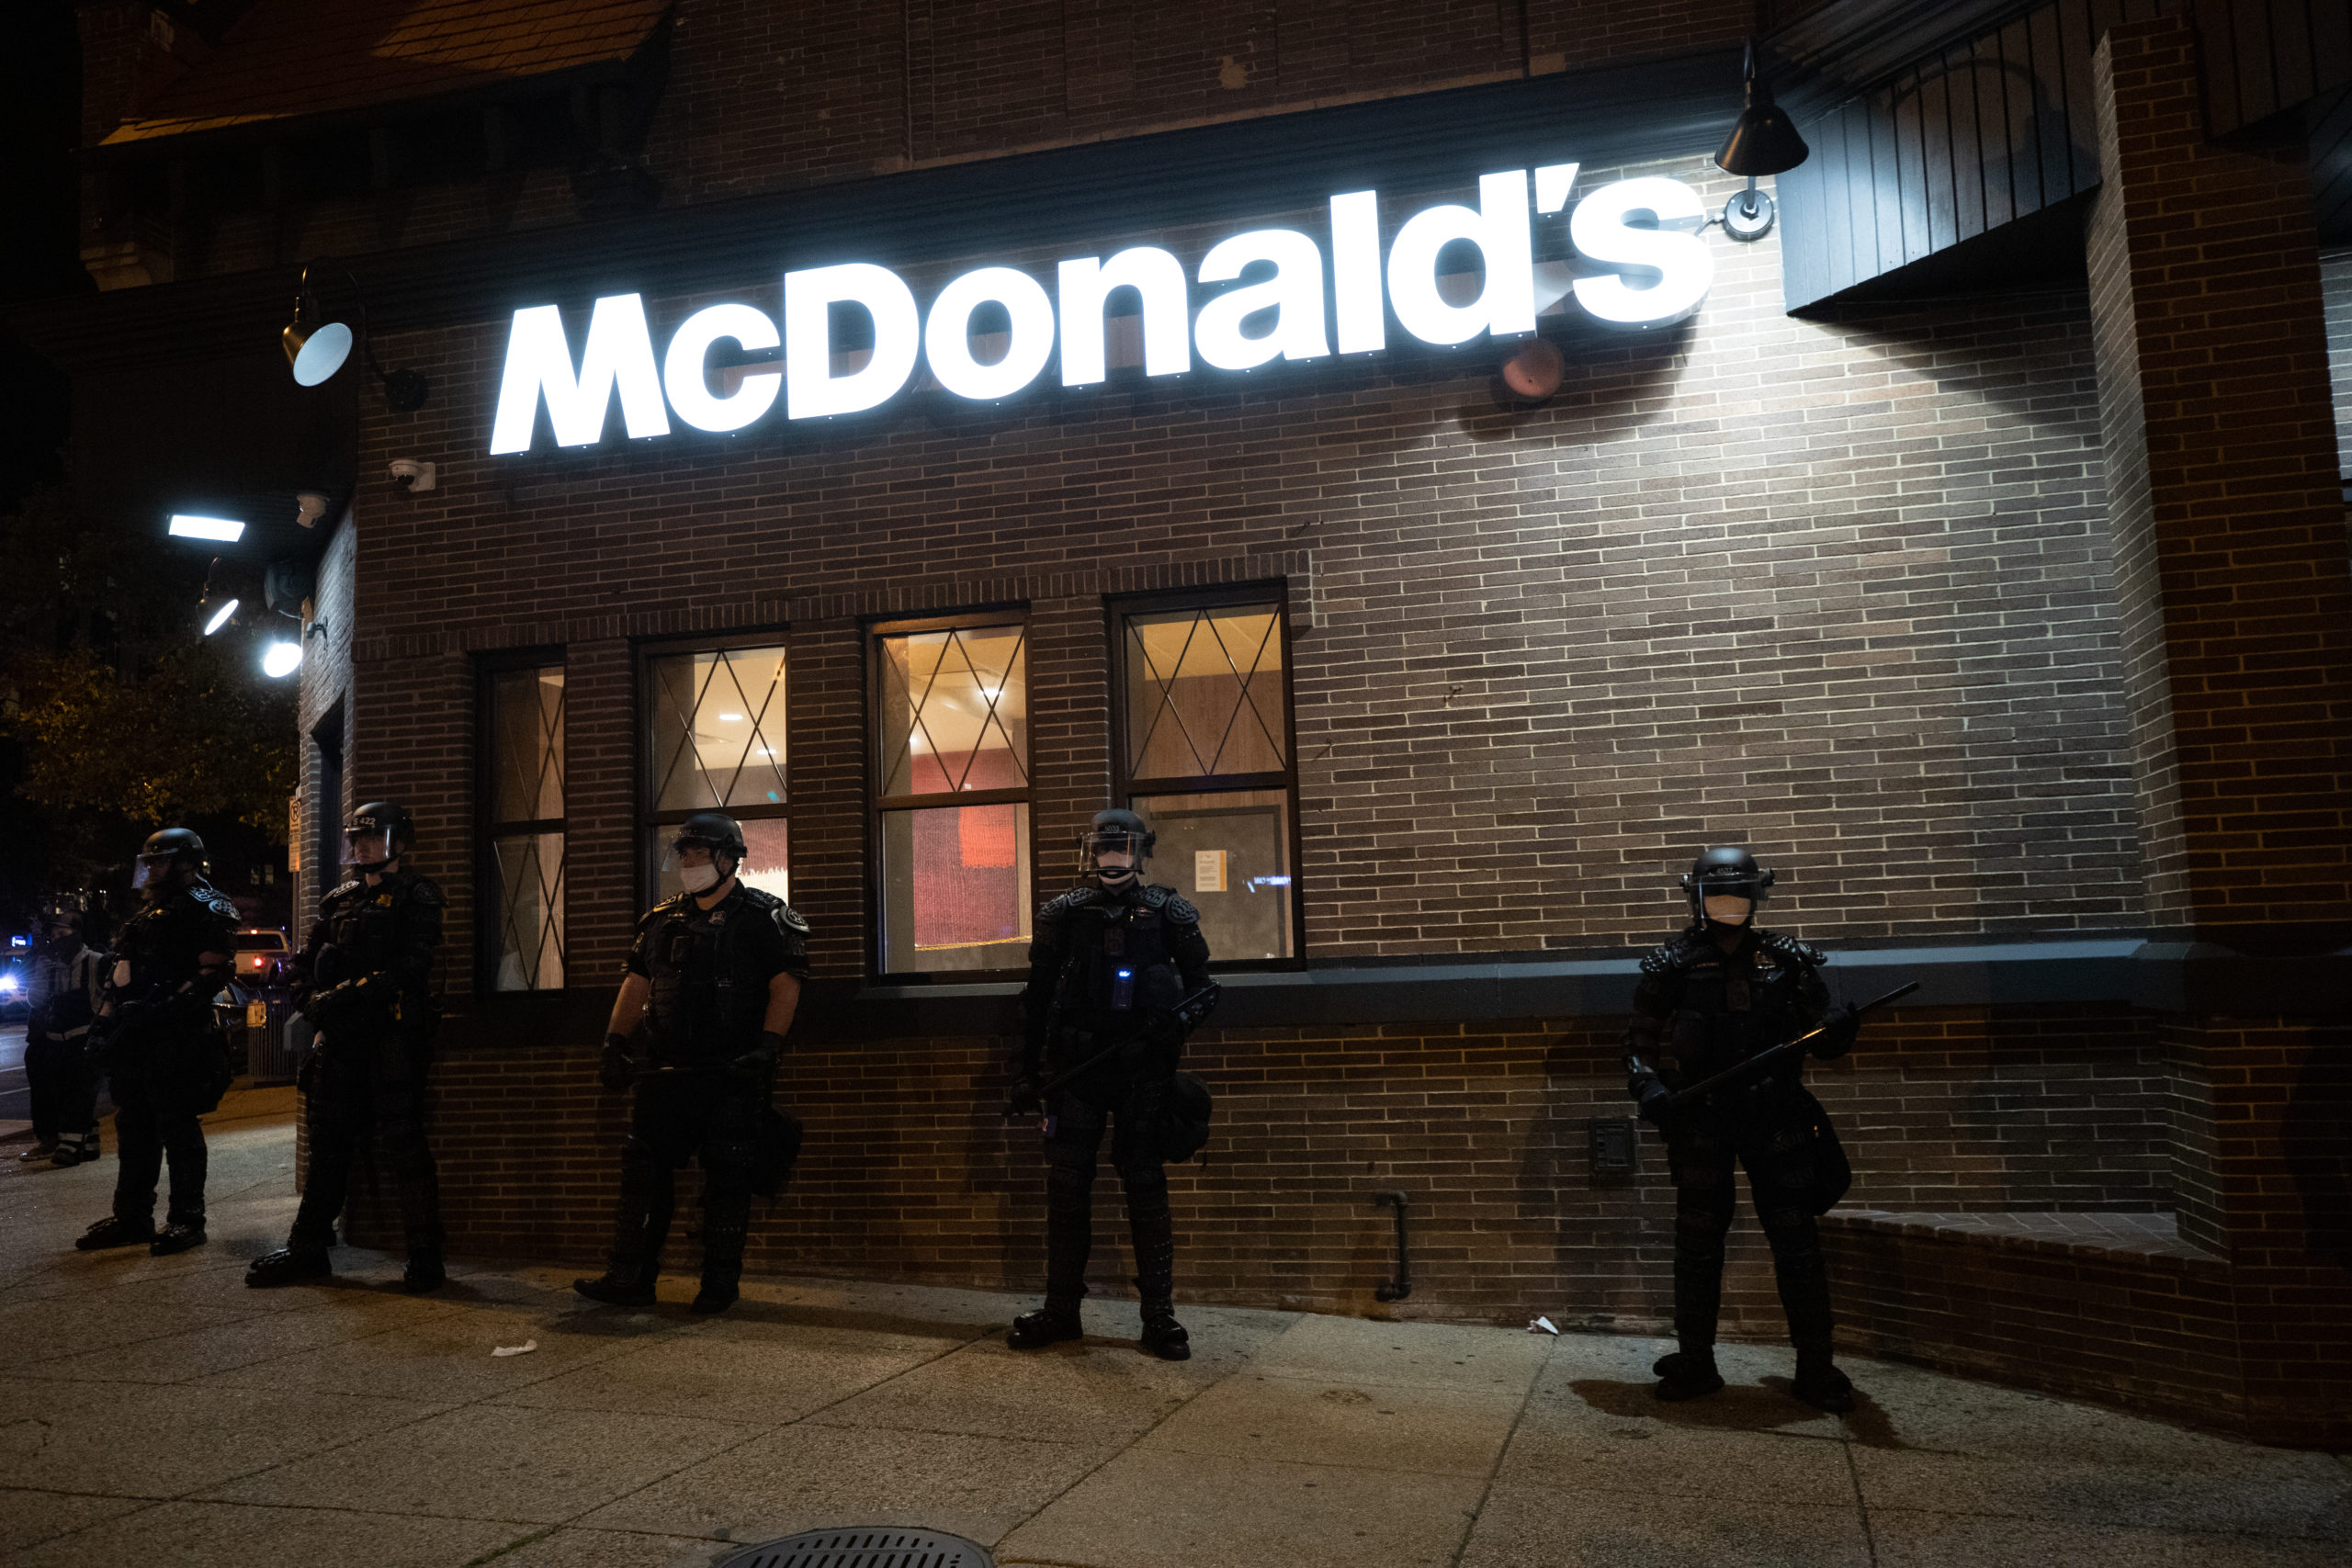 Metropolitan Police Department officers stood outside of a McDonald's restaurant in what appeared to be riot gear in Adams Morgan, Washington, D.C. on Sept. 23. (Photo: Kaylee Greenlee / DCNF)